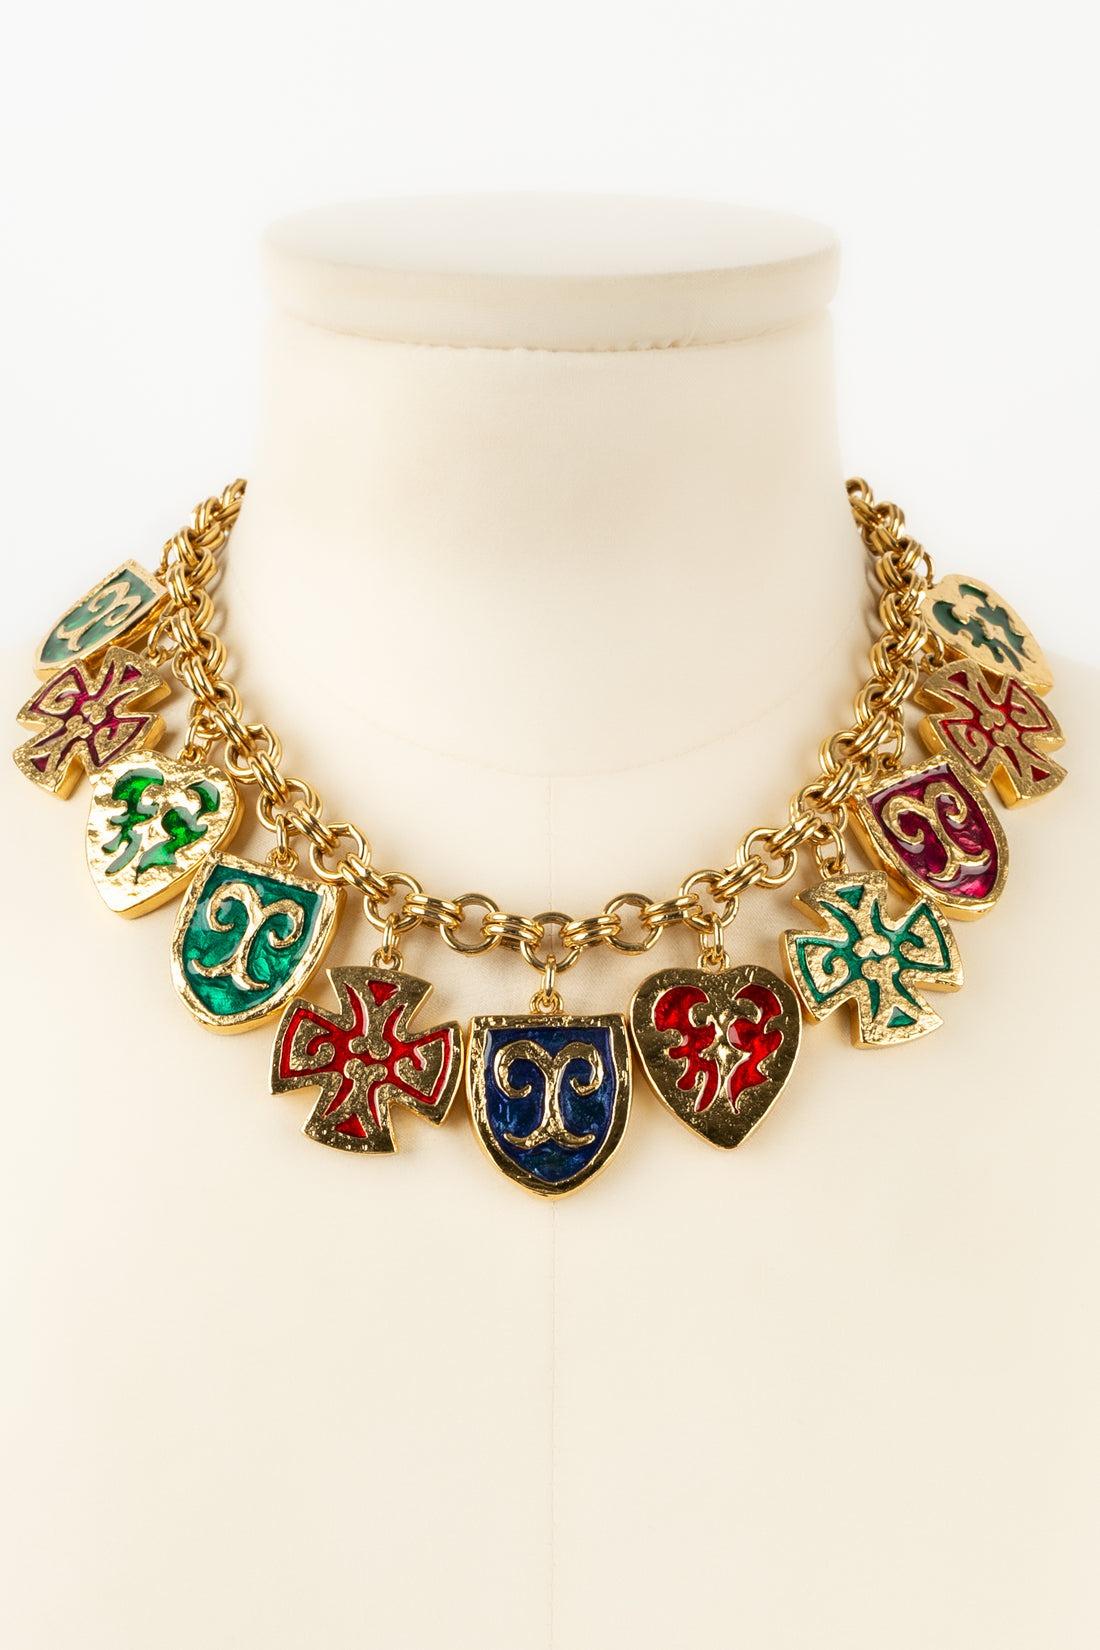 Yves Saint Laurent - (Made in France) Short necklace in gold-plated metal and enamel.

Additional information:
Condition: Very good condition
Dimensions: Length: from 39 cm to 44 cm

Seller Reference: BC179